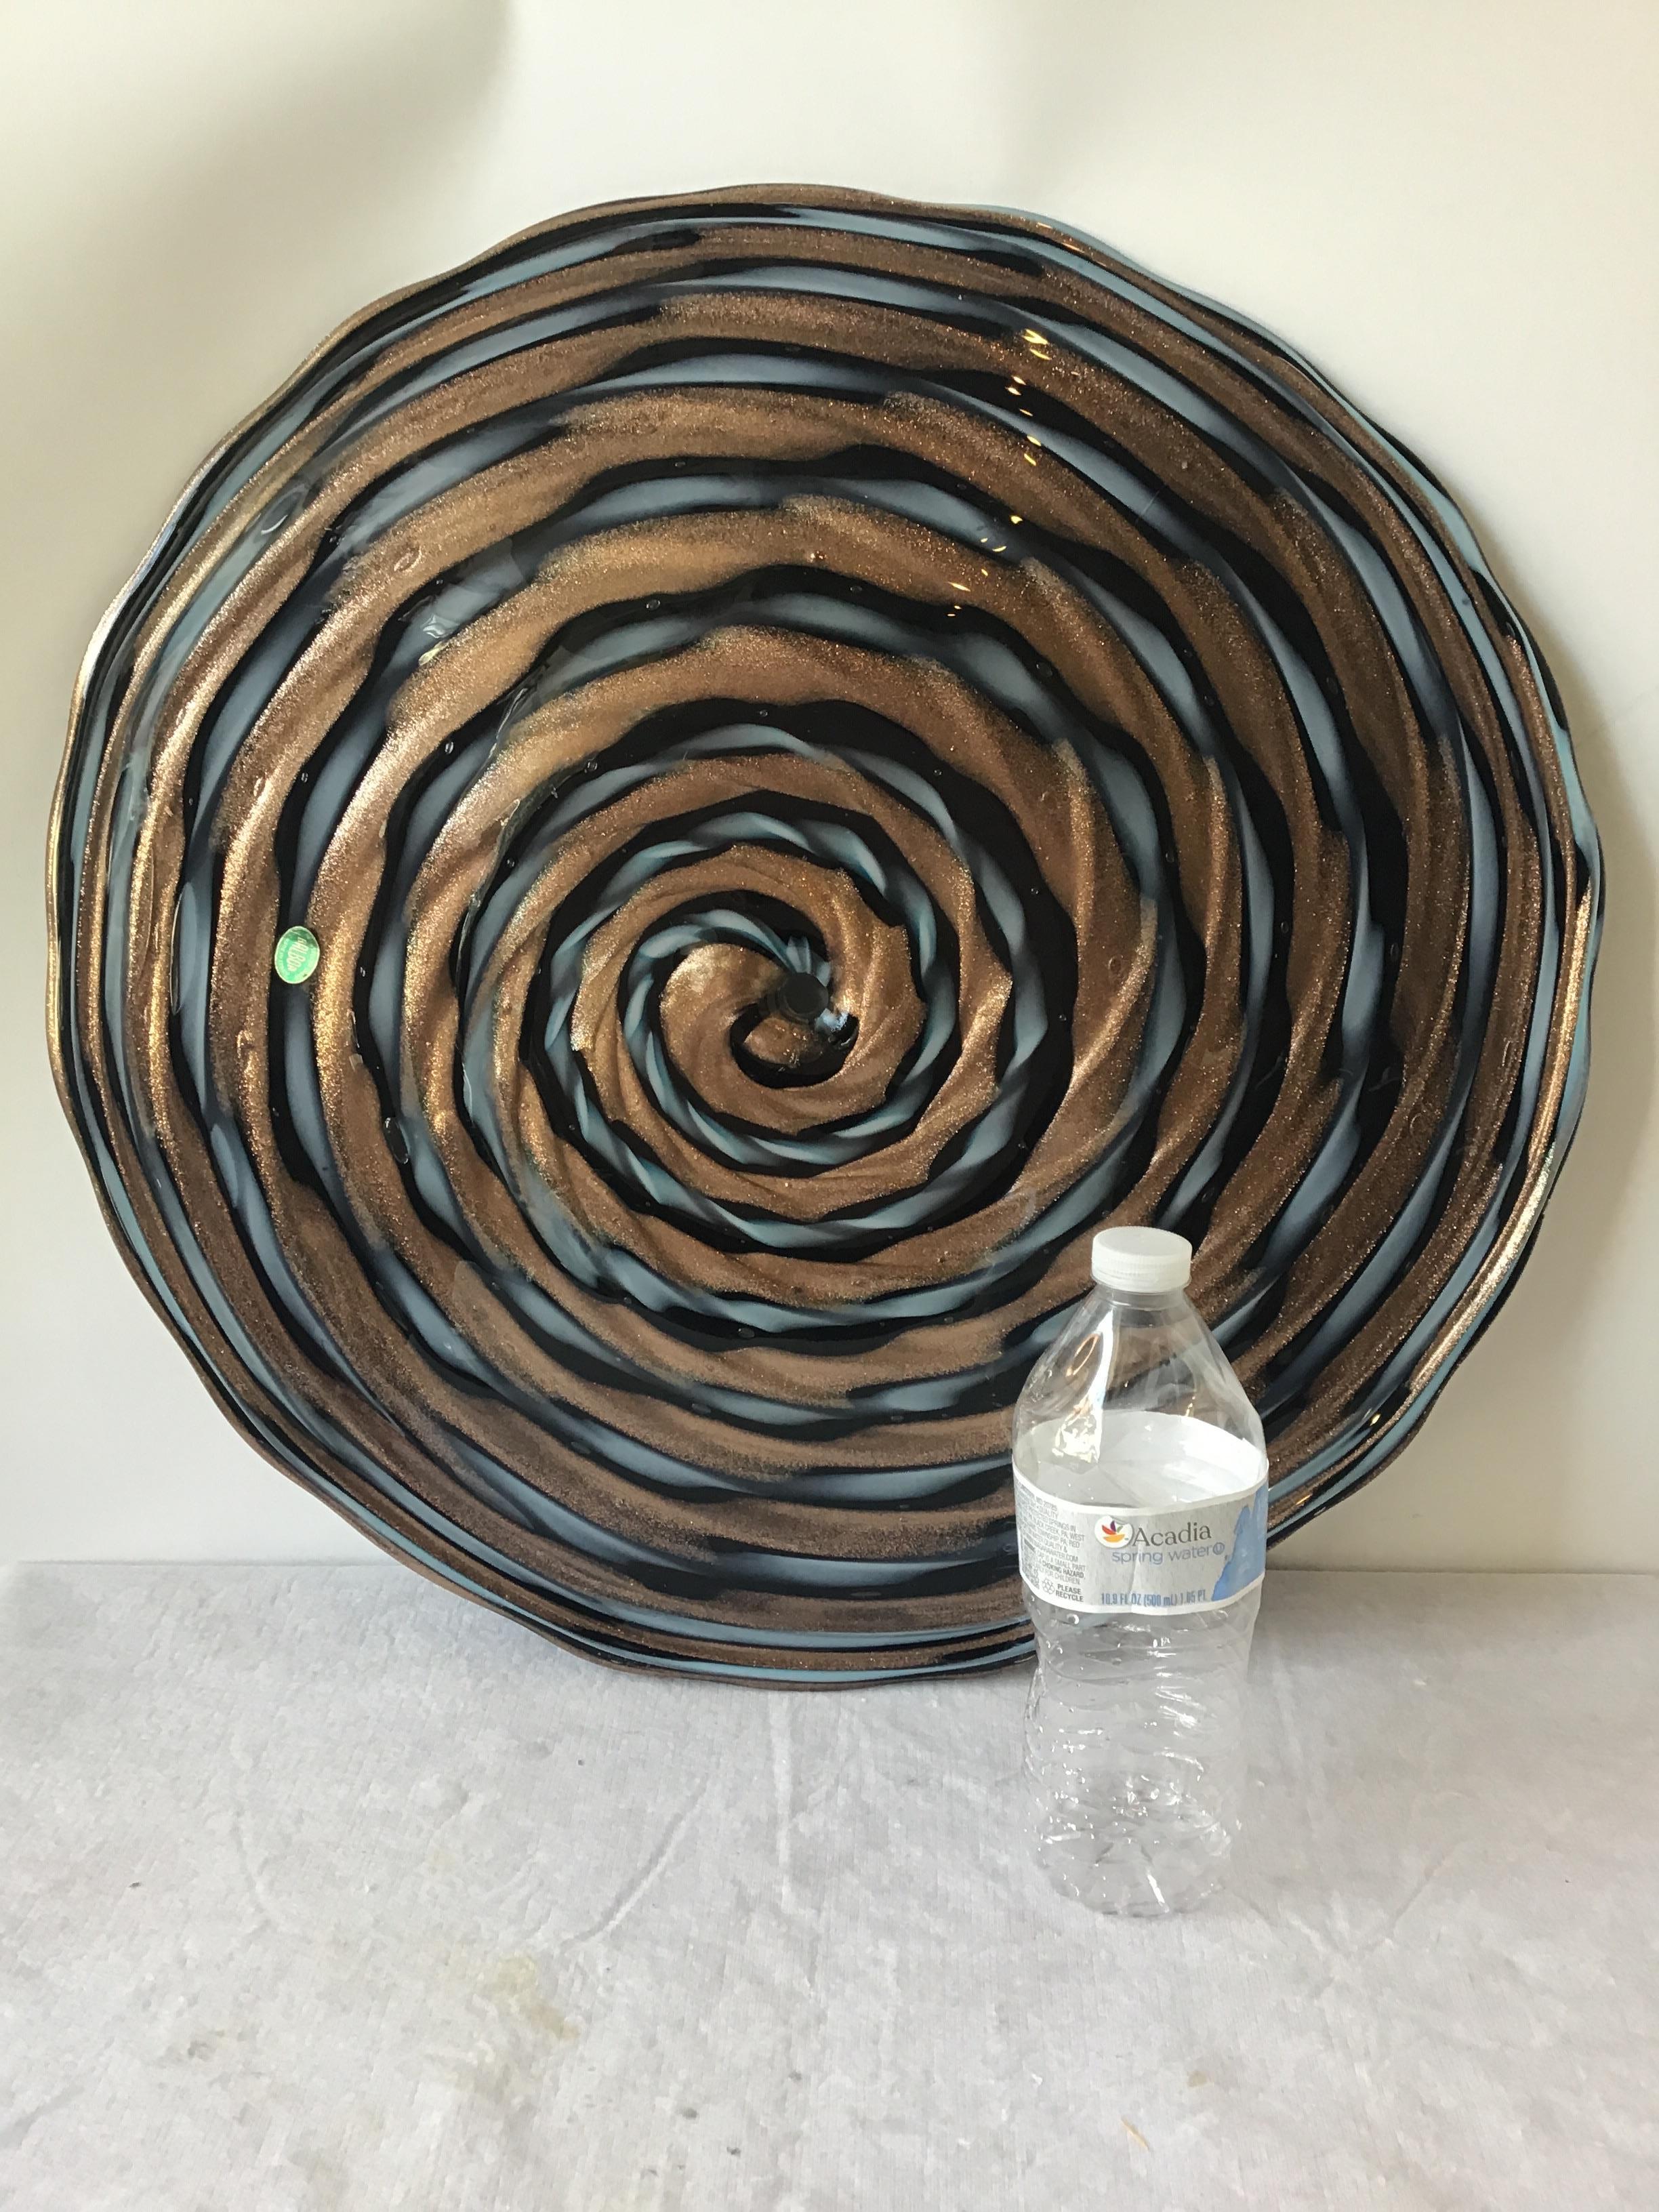 1960s Murano glass tabletop by Balboa. Can also be used to make into a light fixture.
   